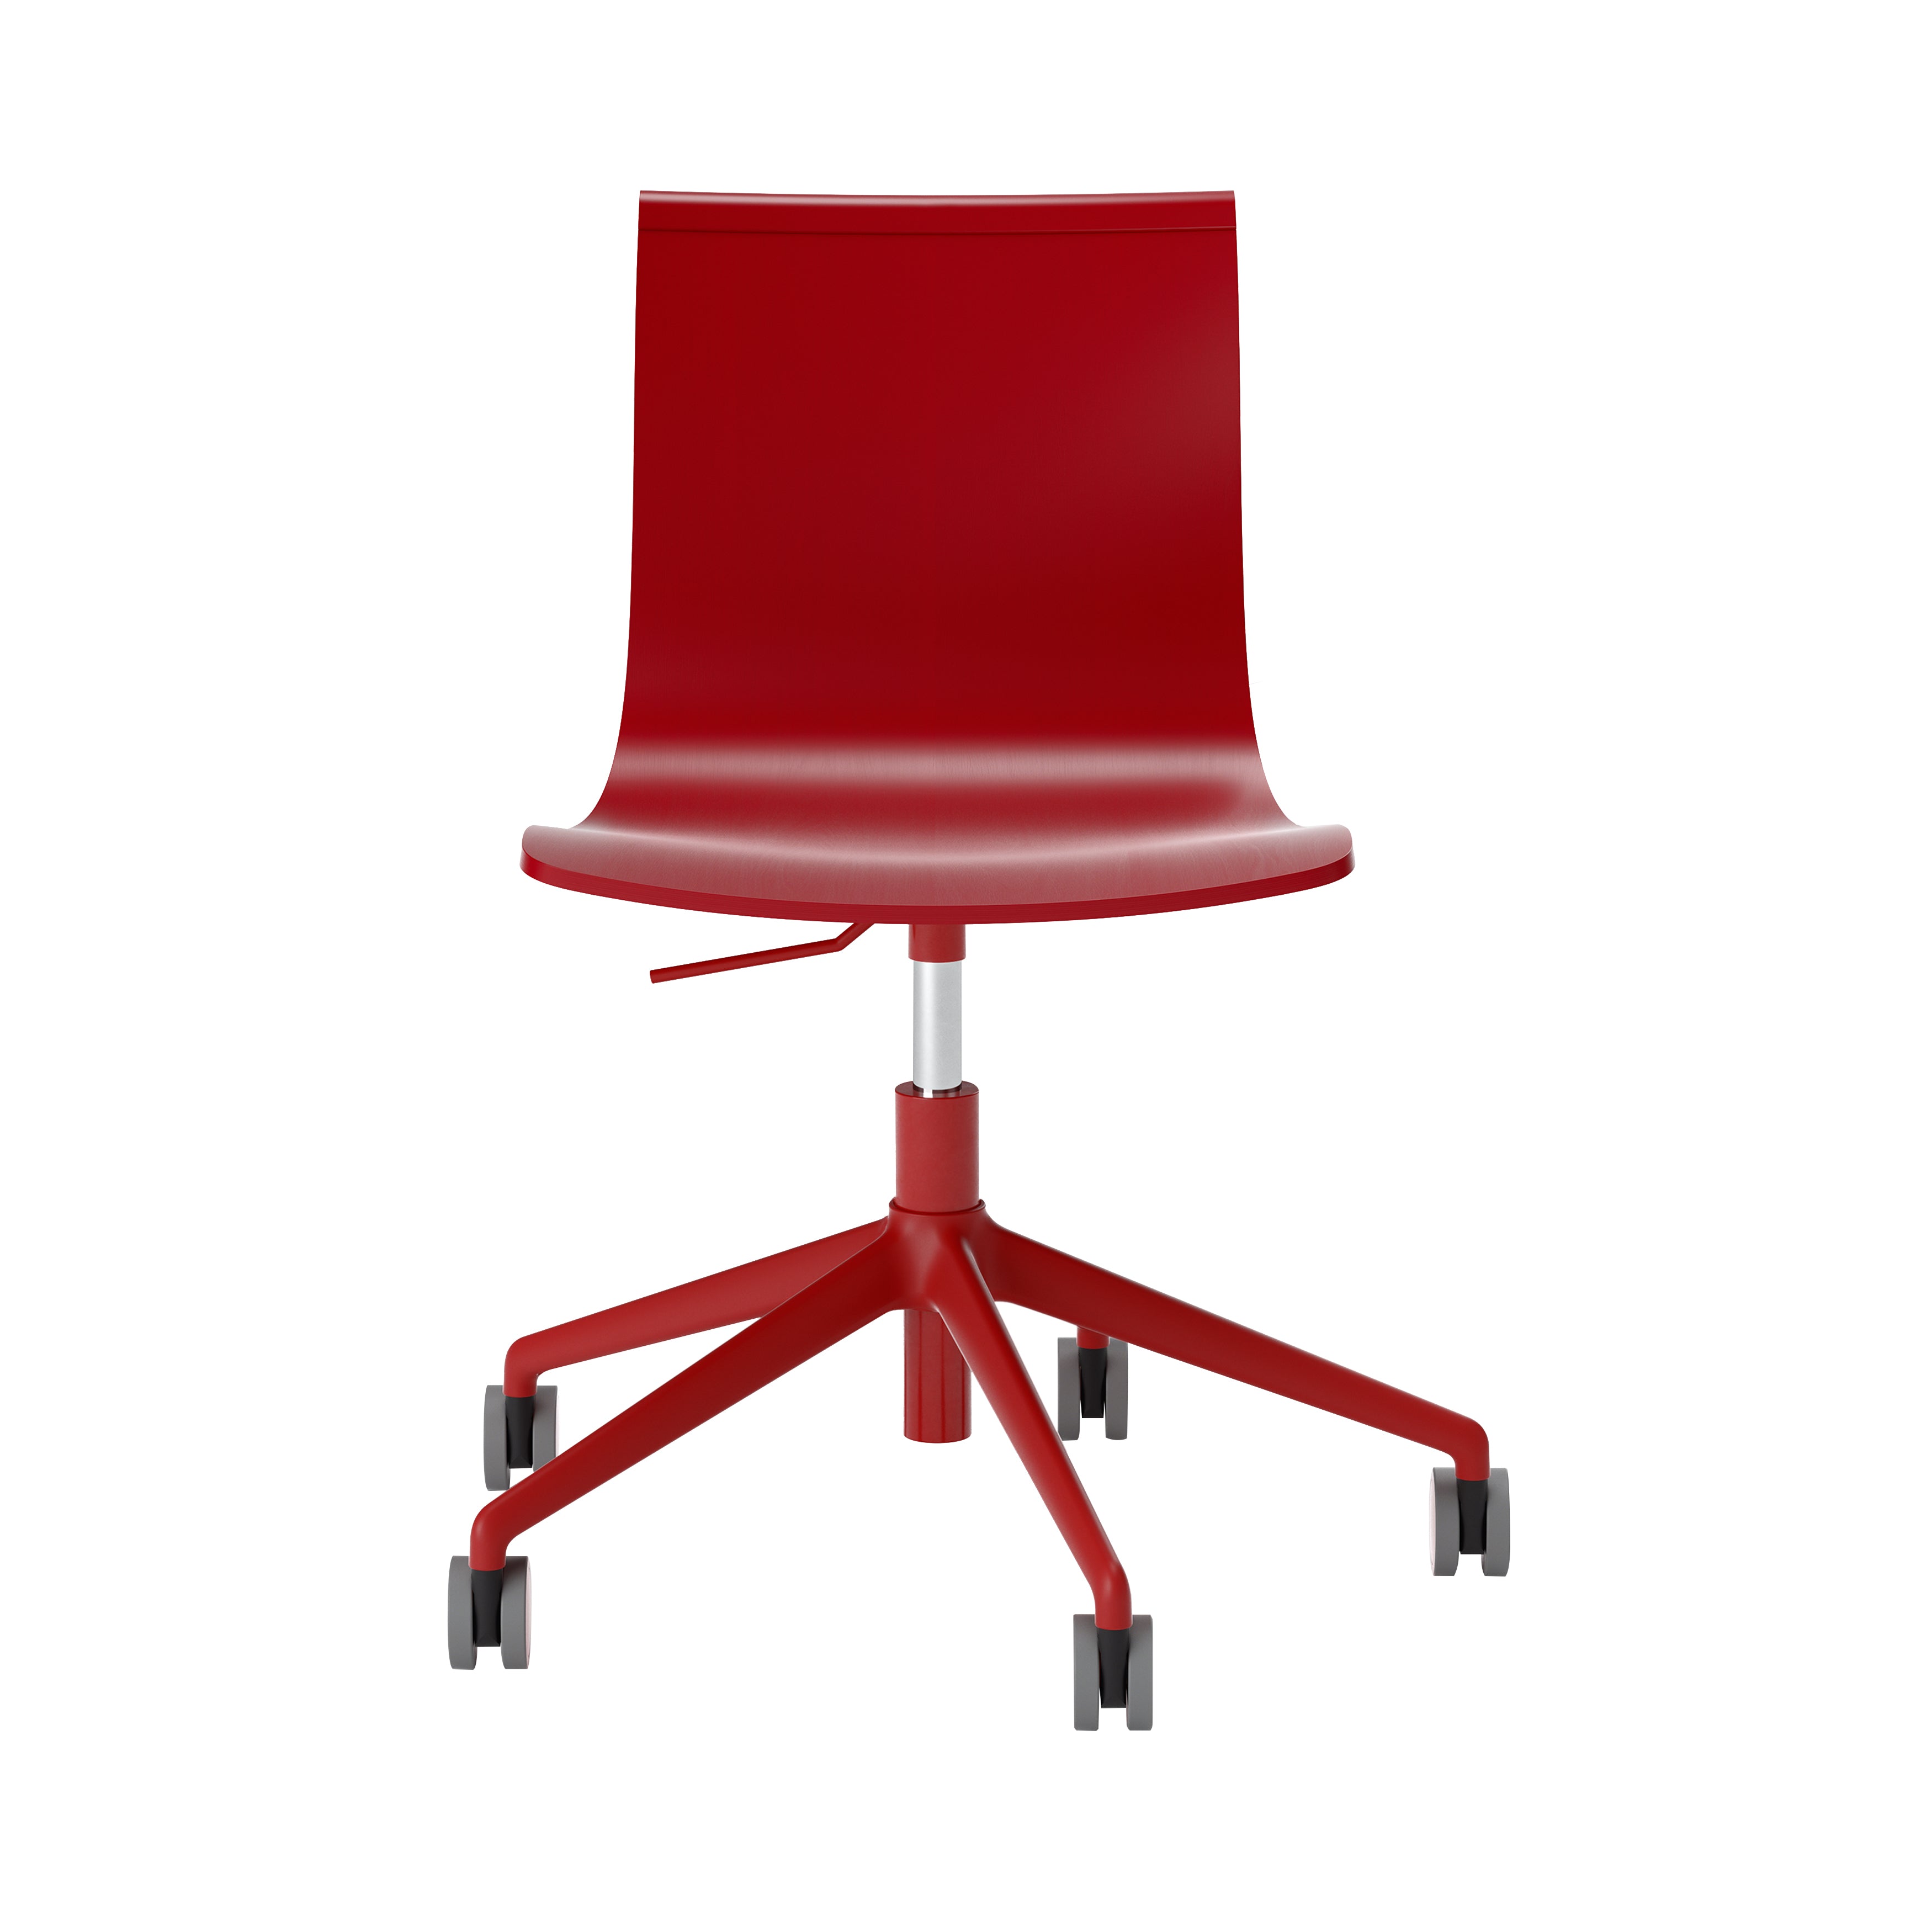 Serif Chair: 5 Star Base + Castors + Red + Red Laquered Beech